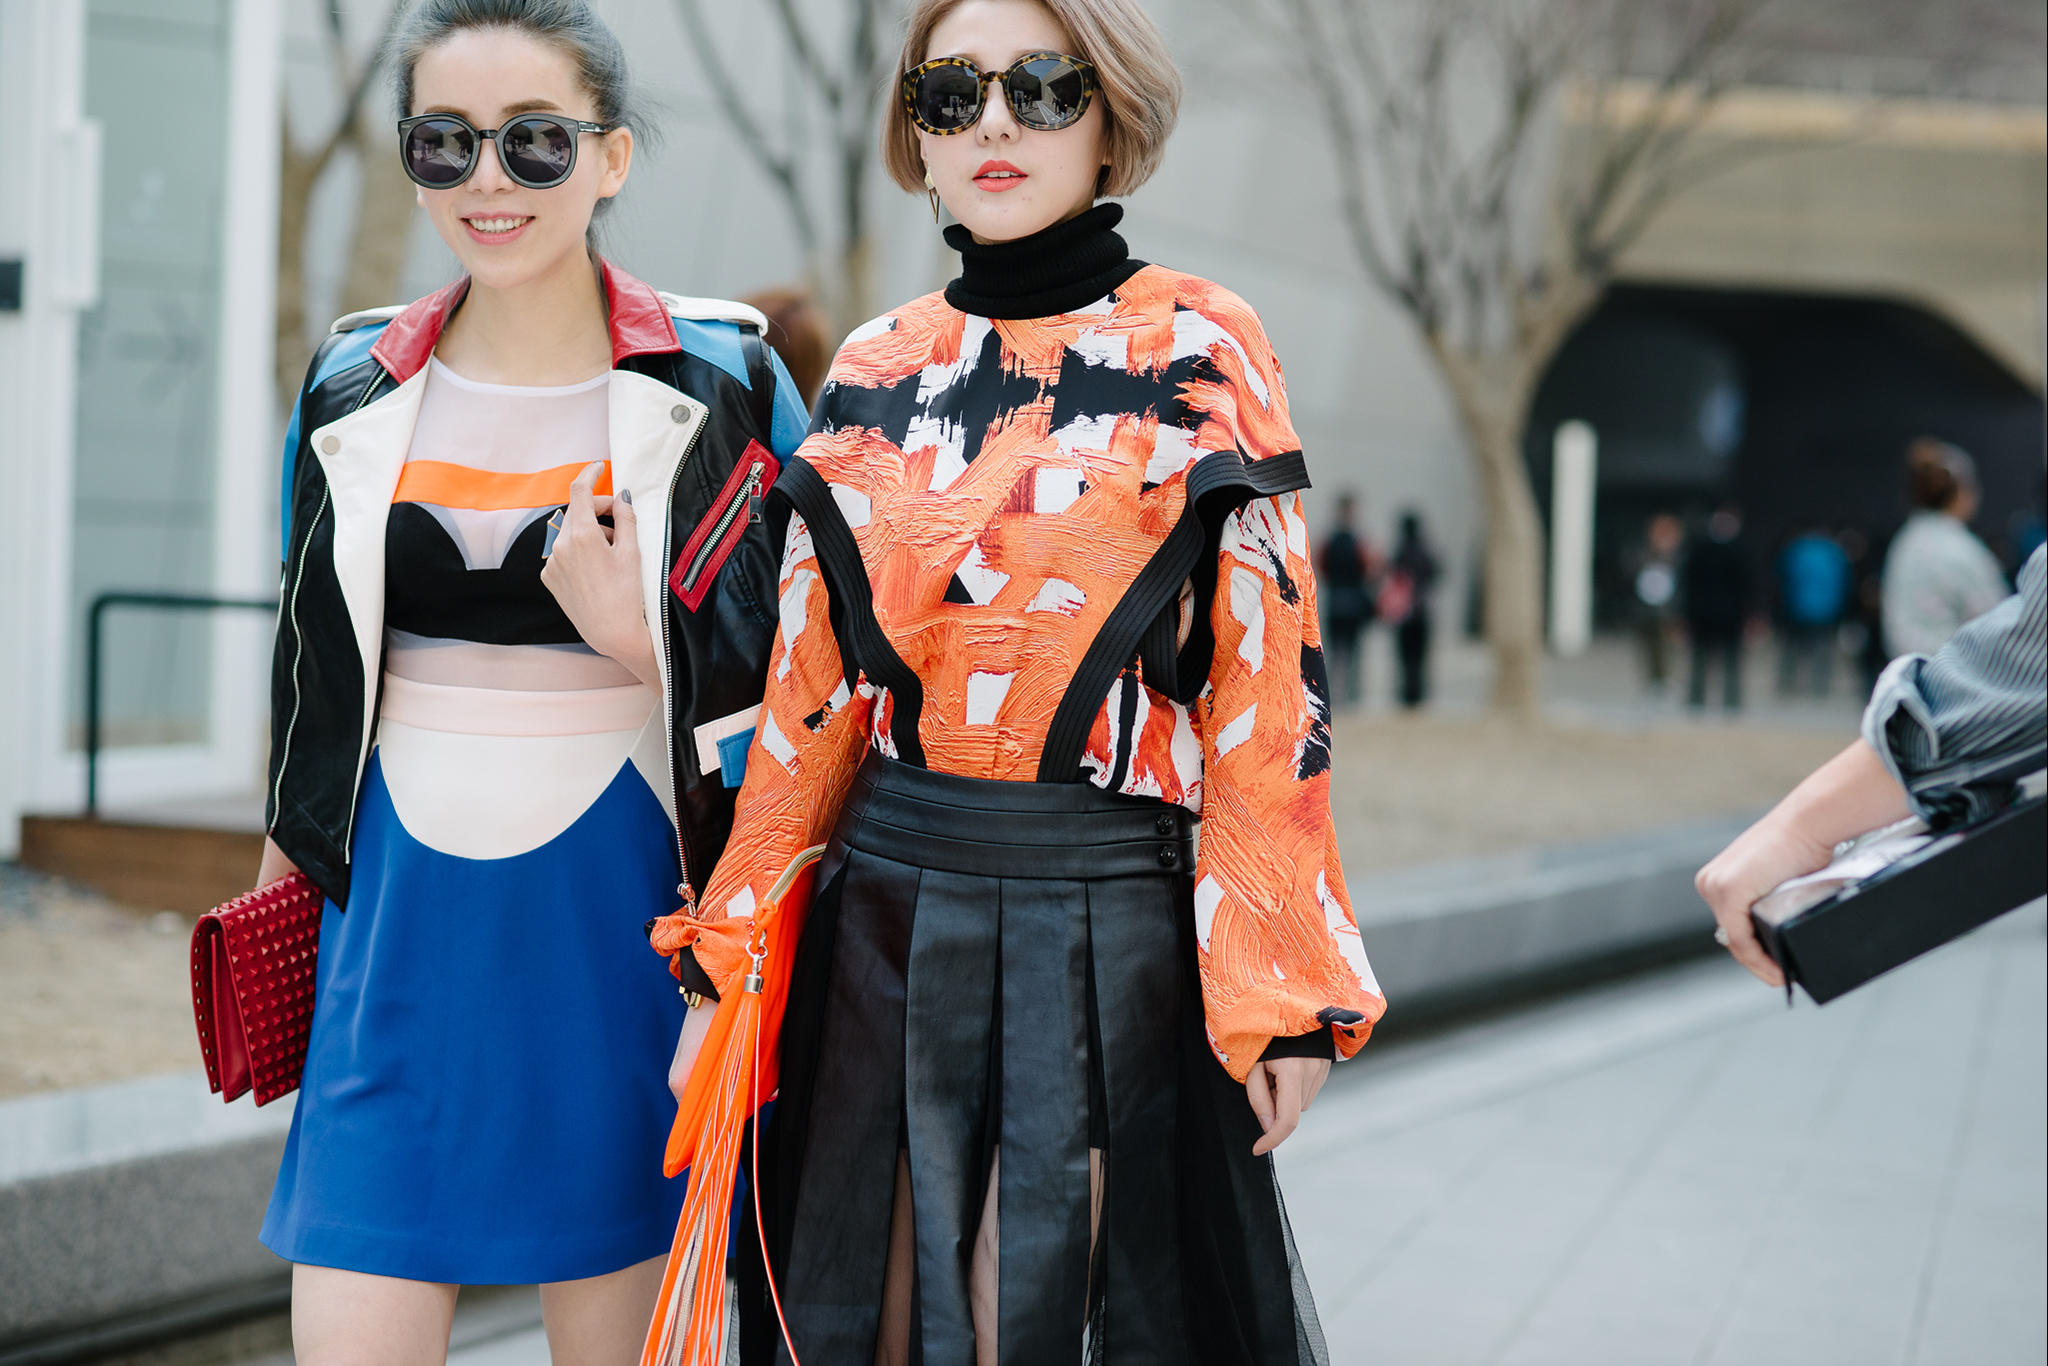 Amazing Street Style At Seoul Fashion Week 2015 Fashion Conversations About Her